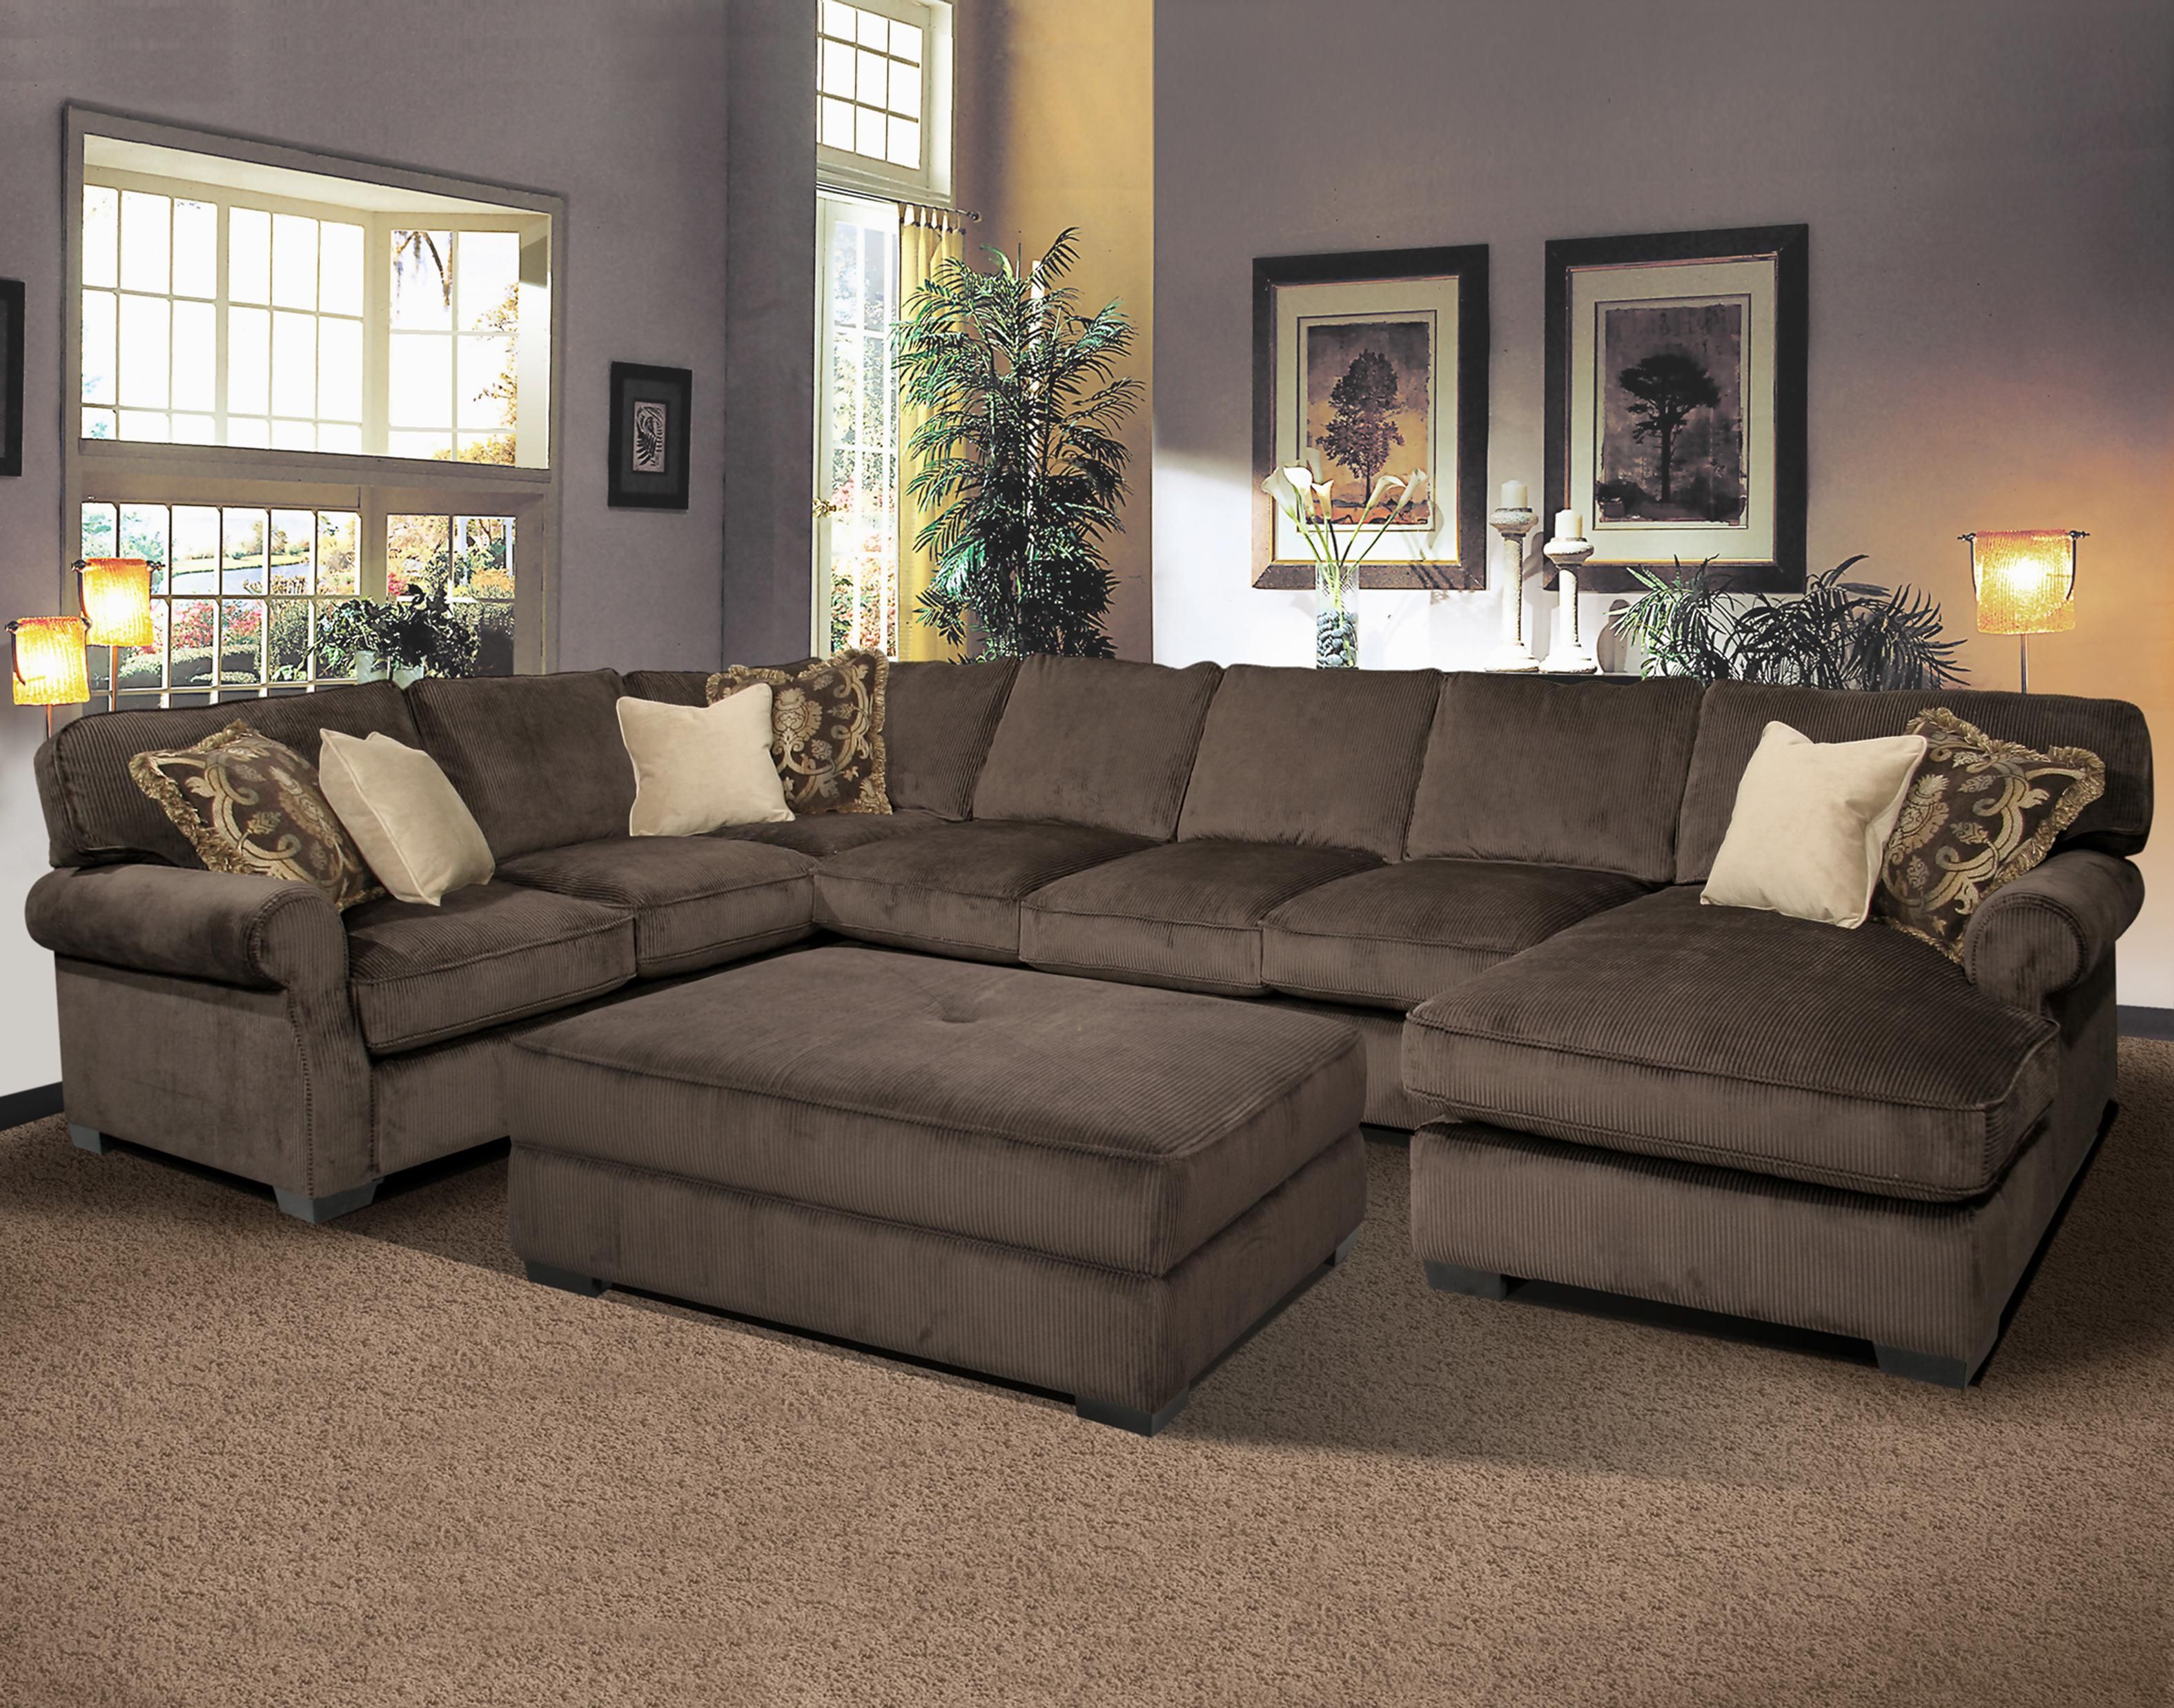 Best 25 Comfy Sectional Ideas On Pinterest Pertaining To Comfortable Sectional Sofa (Photo 2 of 15)